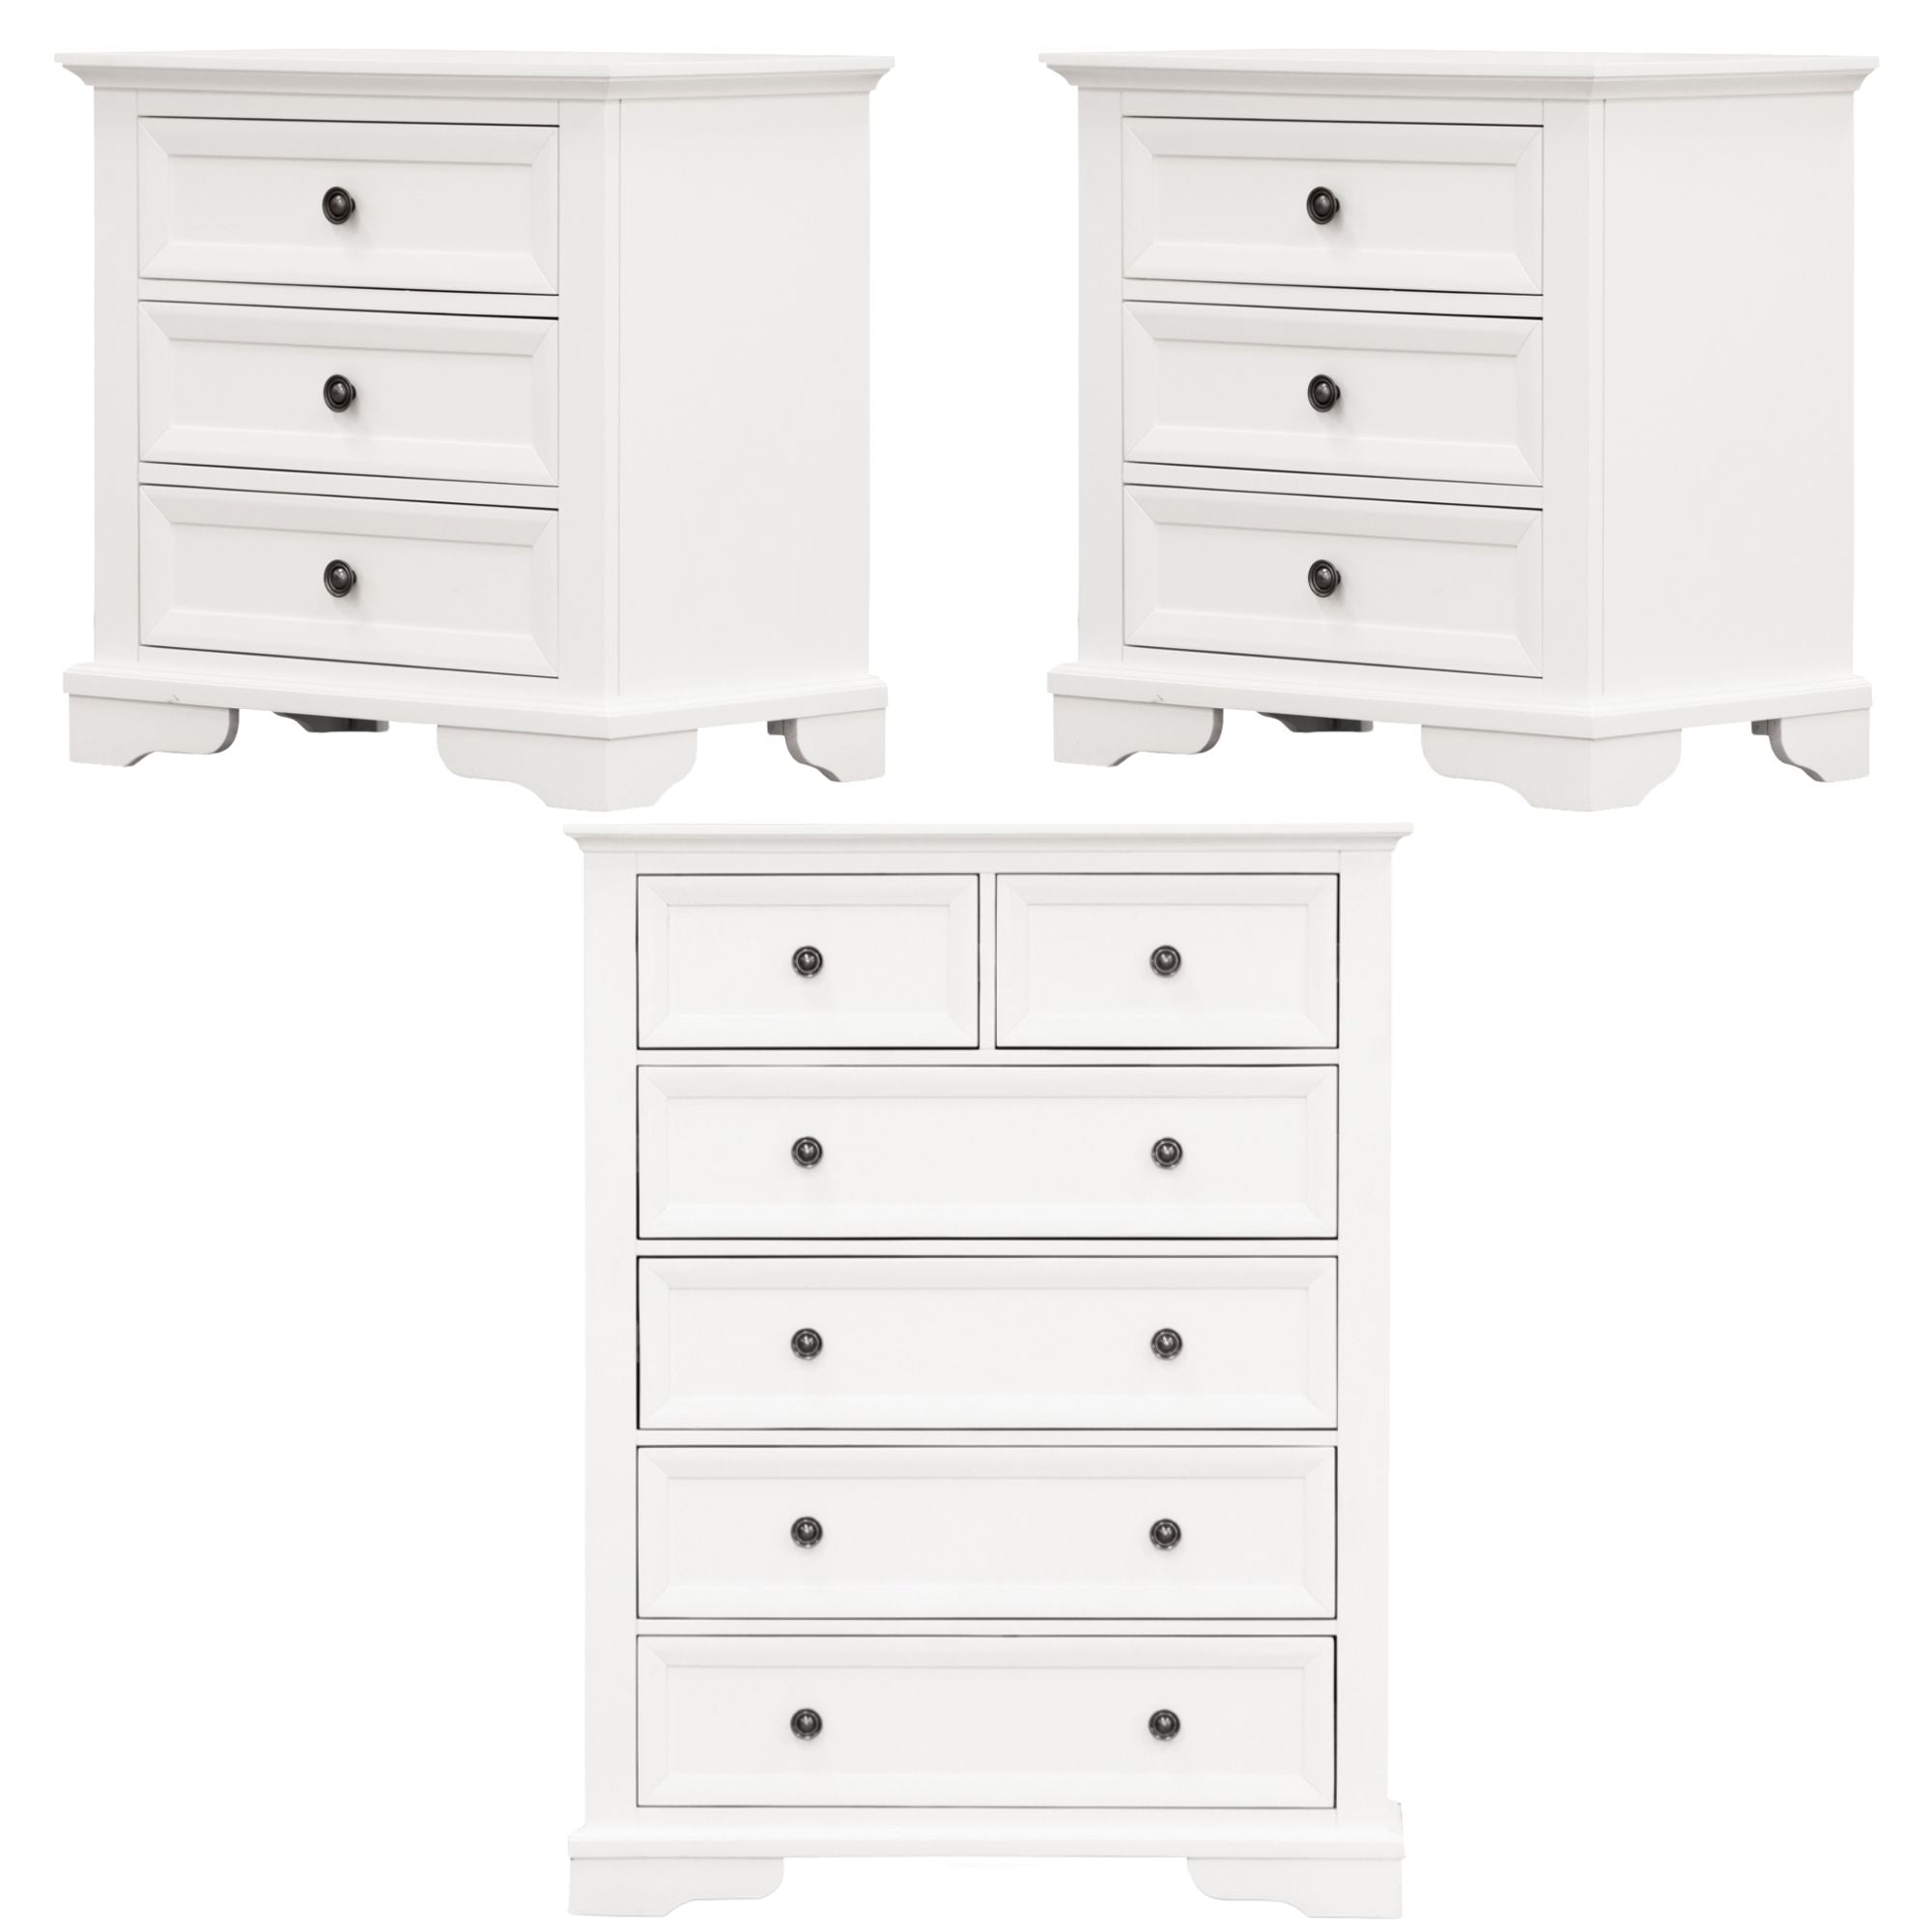 Celosia 2pc Bedside Tallboy 3pc Bedroom Set Nightstand Storage Cabinet - White - SILBERSHELL